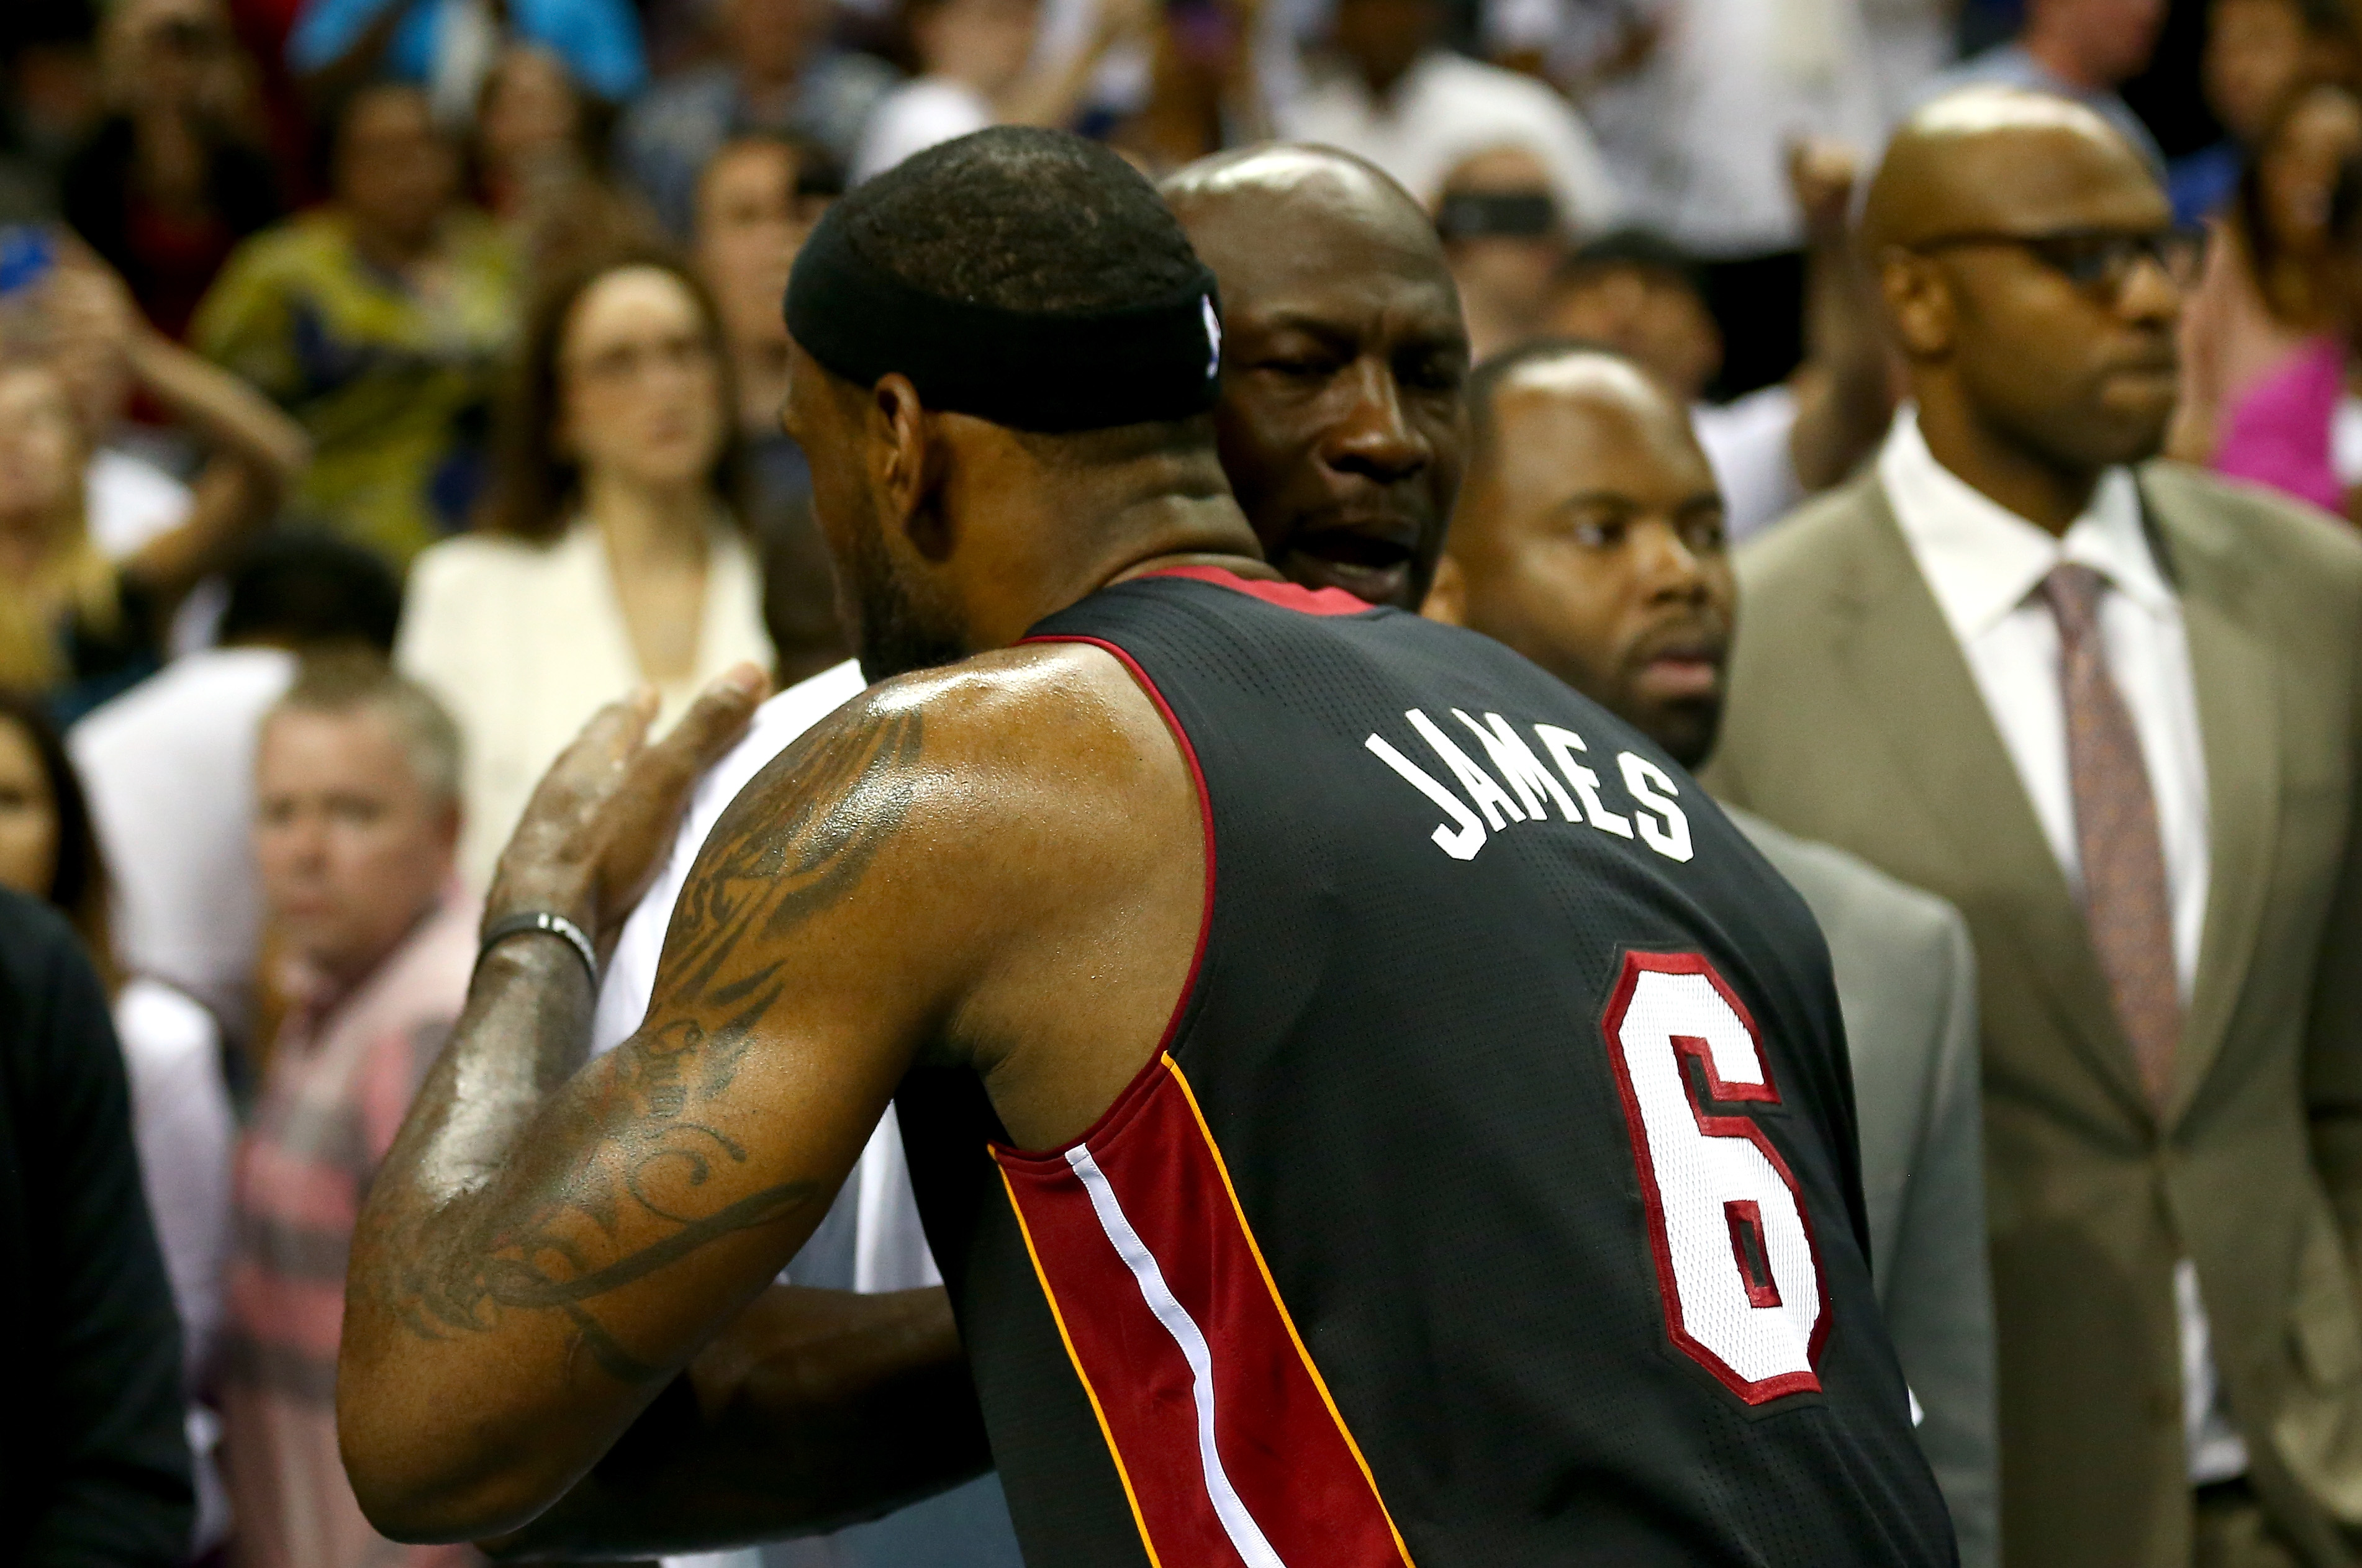 Michael Jordan vs. LeBron James - Everything you need to know about the NBA  GOAT debate - ESPN